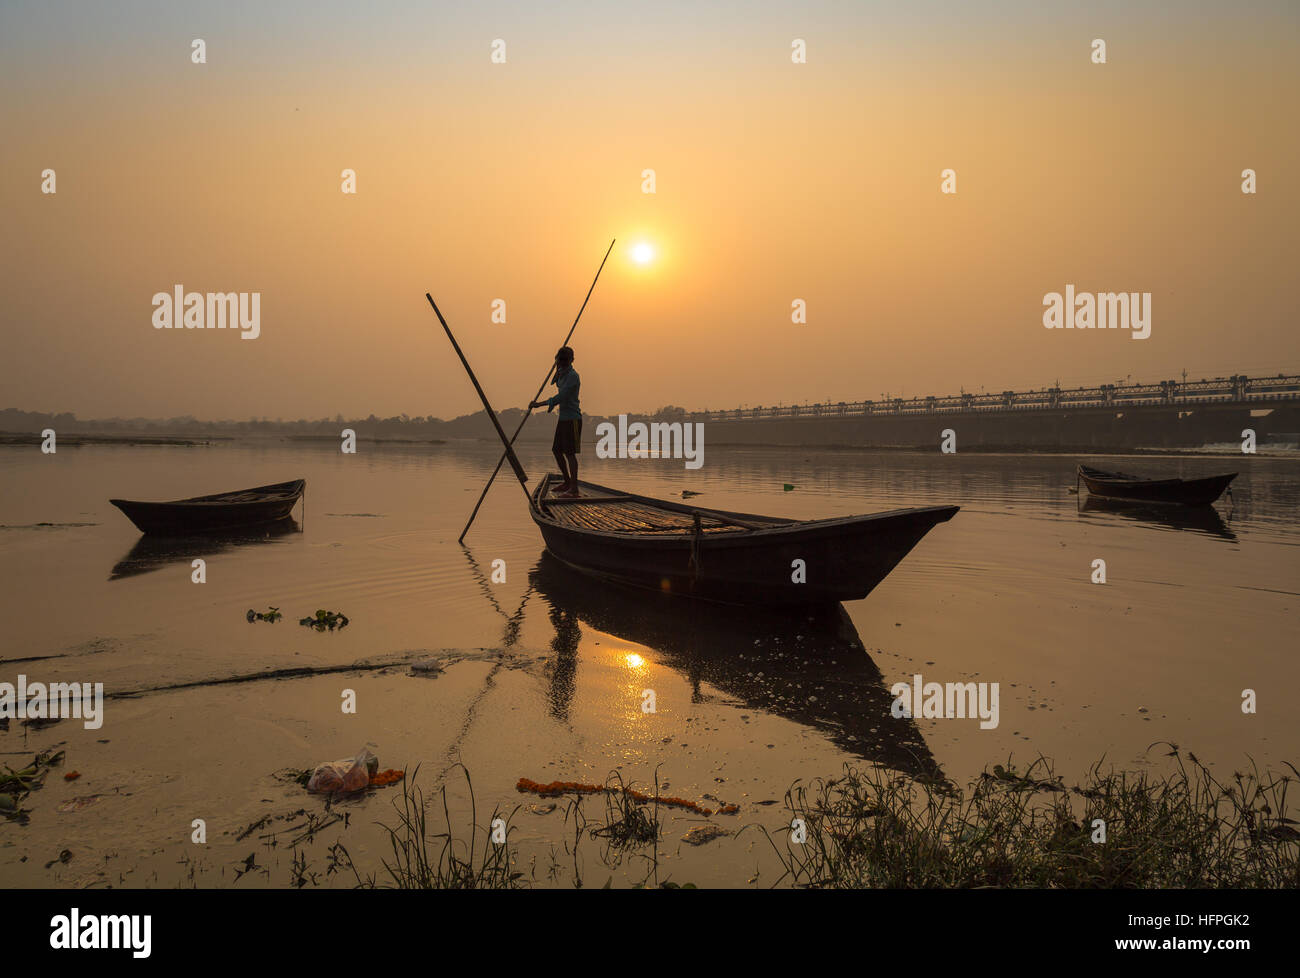 Silhouette wooden boat with oarsman at sunset on river Damodar, Durgapur Barrage, West Bengal, India. Stock Photo